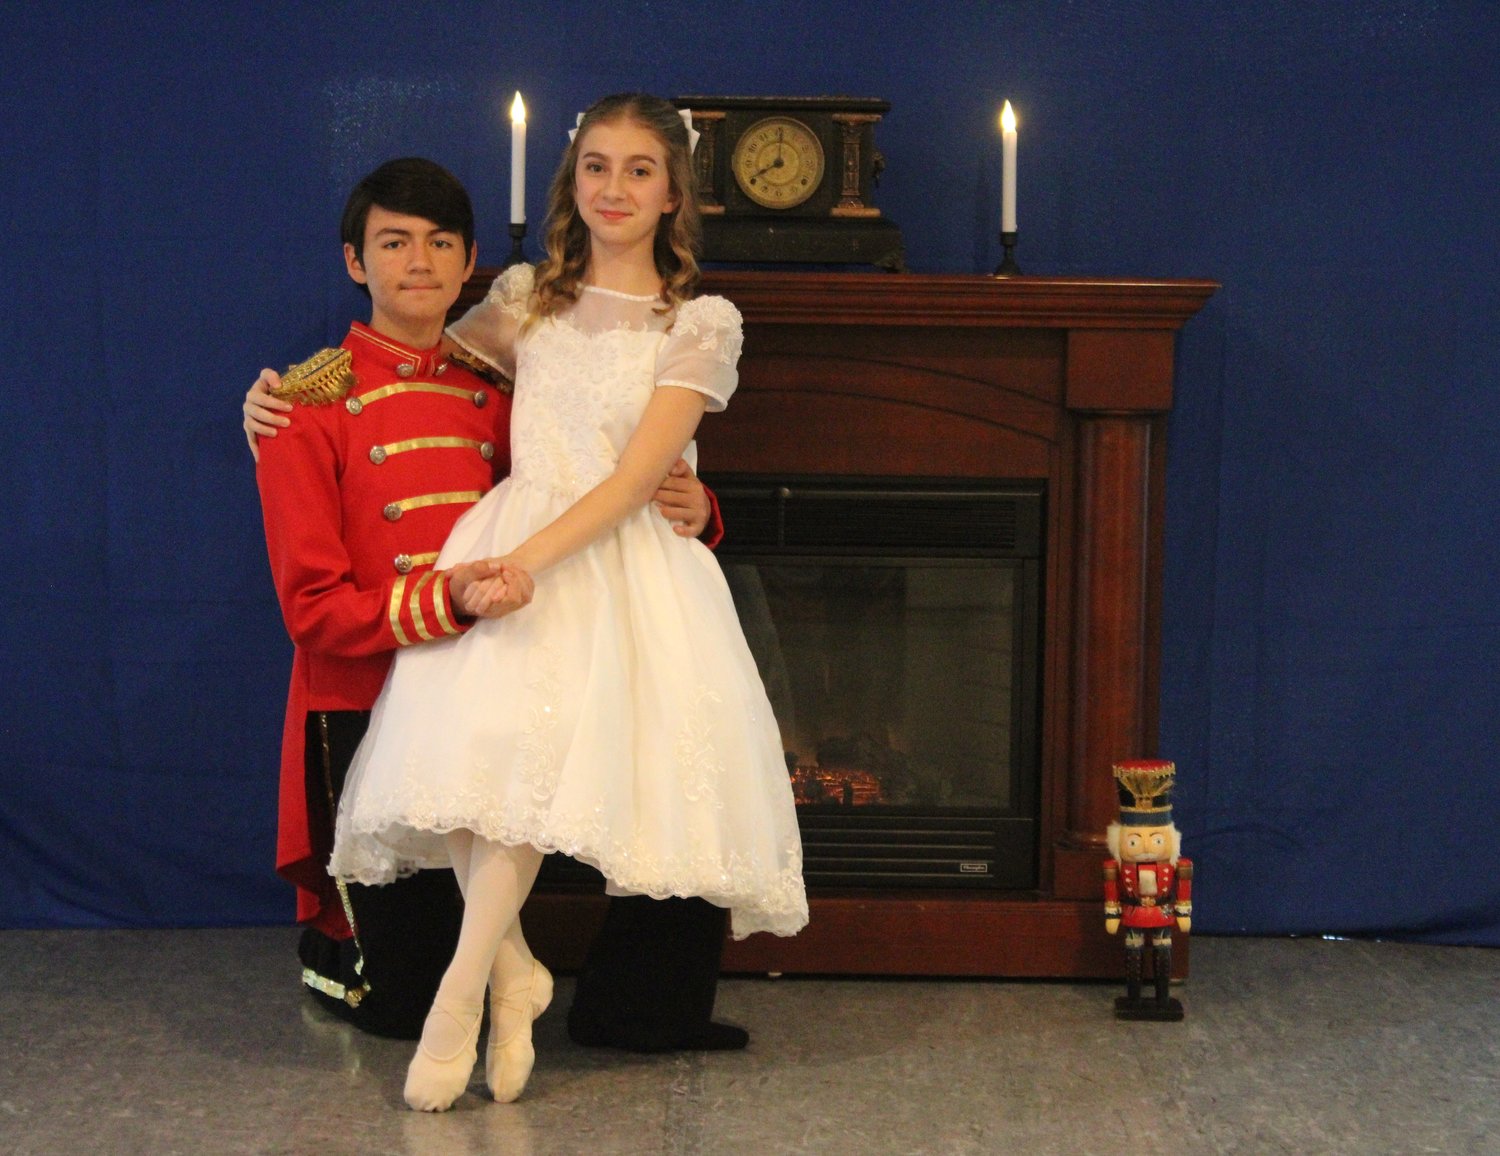 Keirrah Bailey and Daniel York will dance the roles of Clara and the Prince in the holiday classic "The Nutcracker," on Saturday, November 26 at 12 noon.